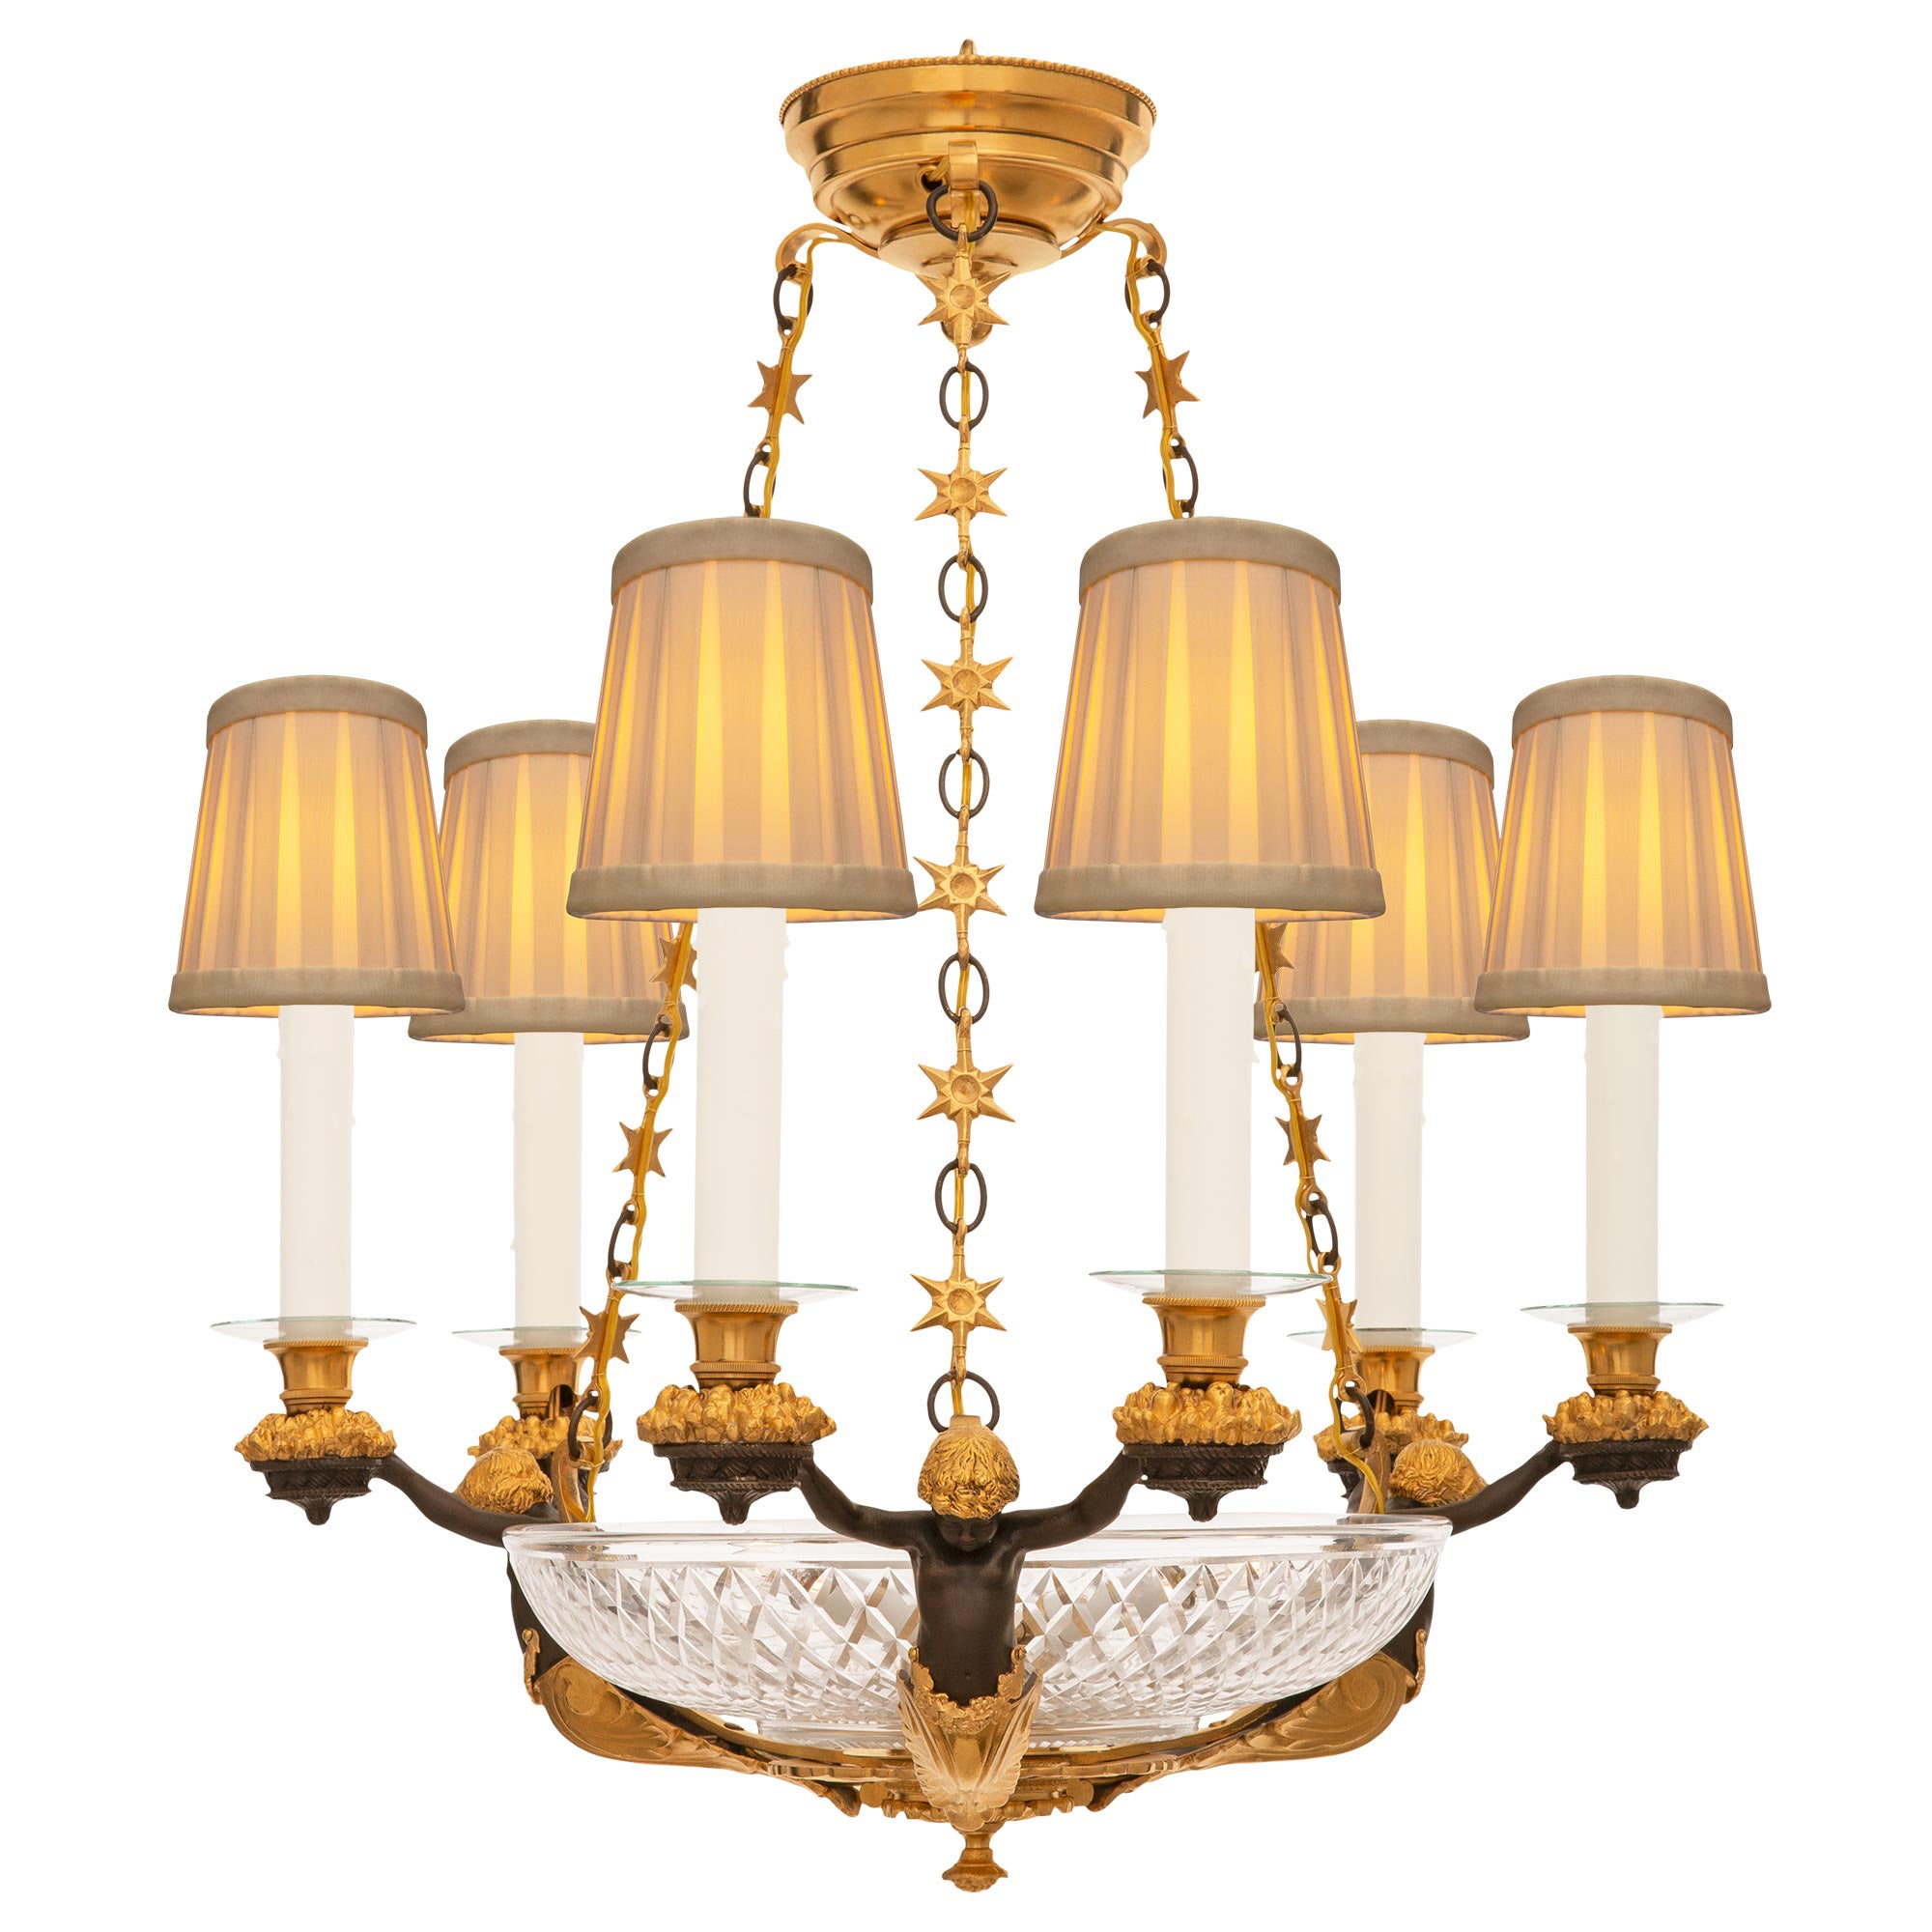 French 19th Century Neo-Classical St. Bronze, Ormolu & Glass Chandelier For Sale